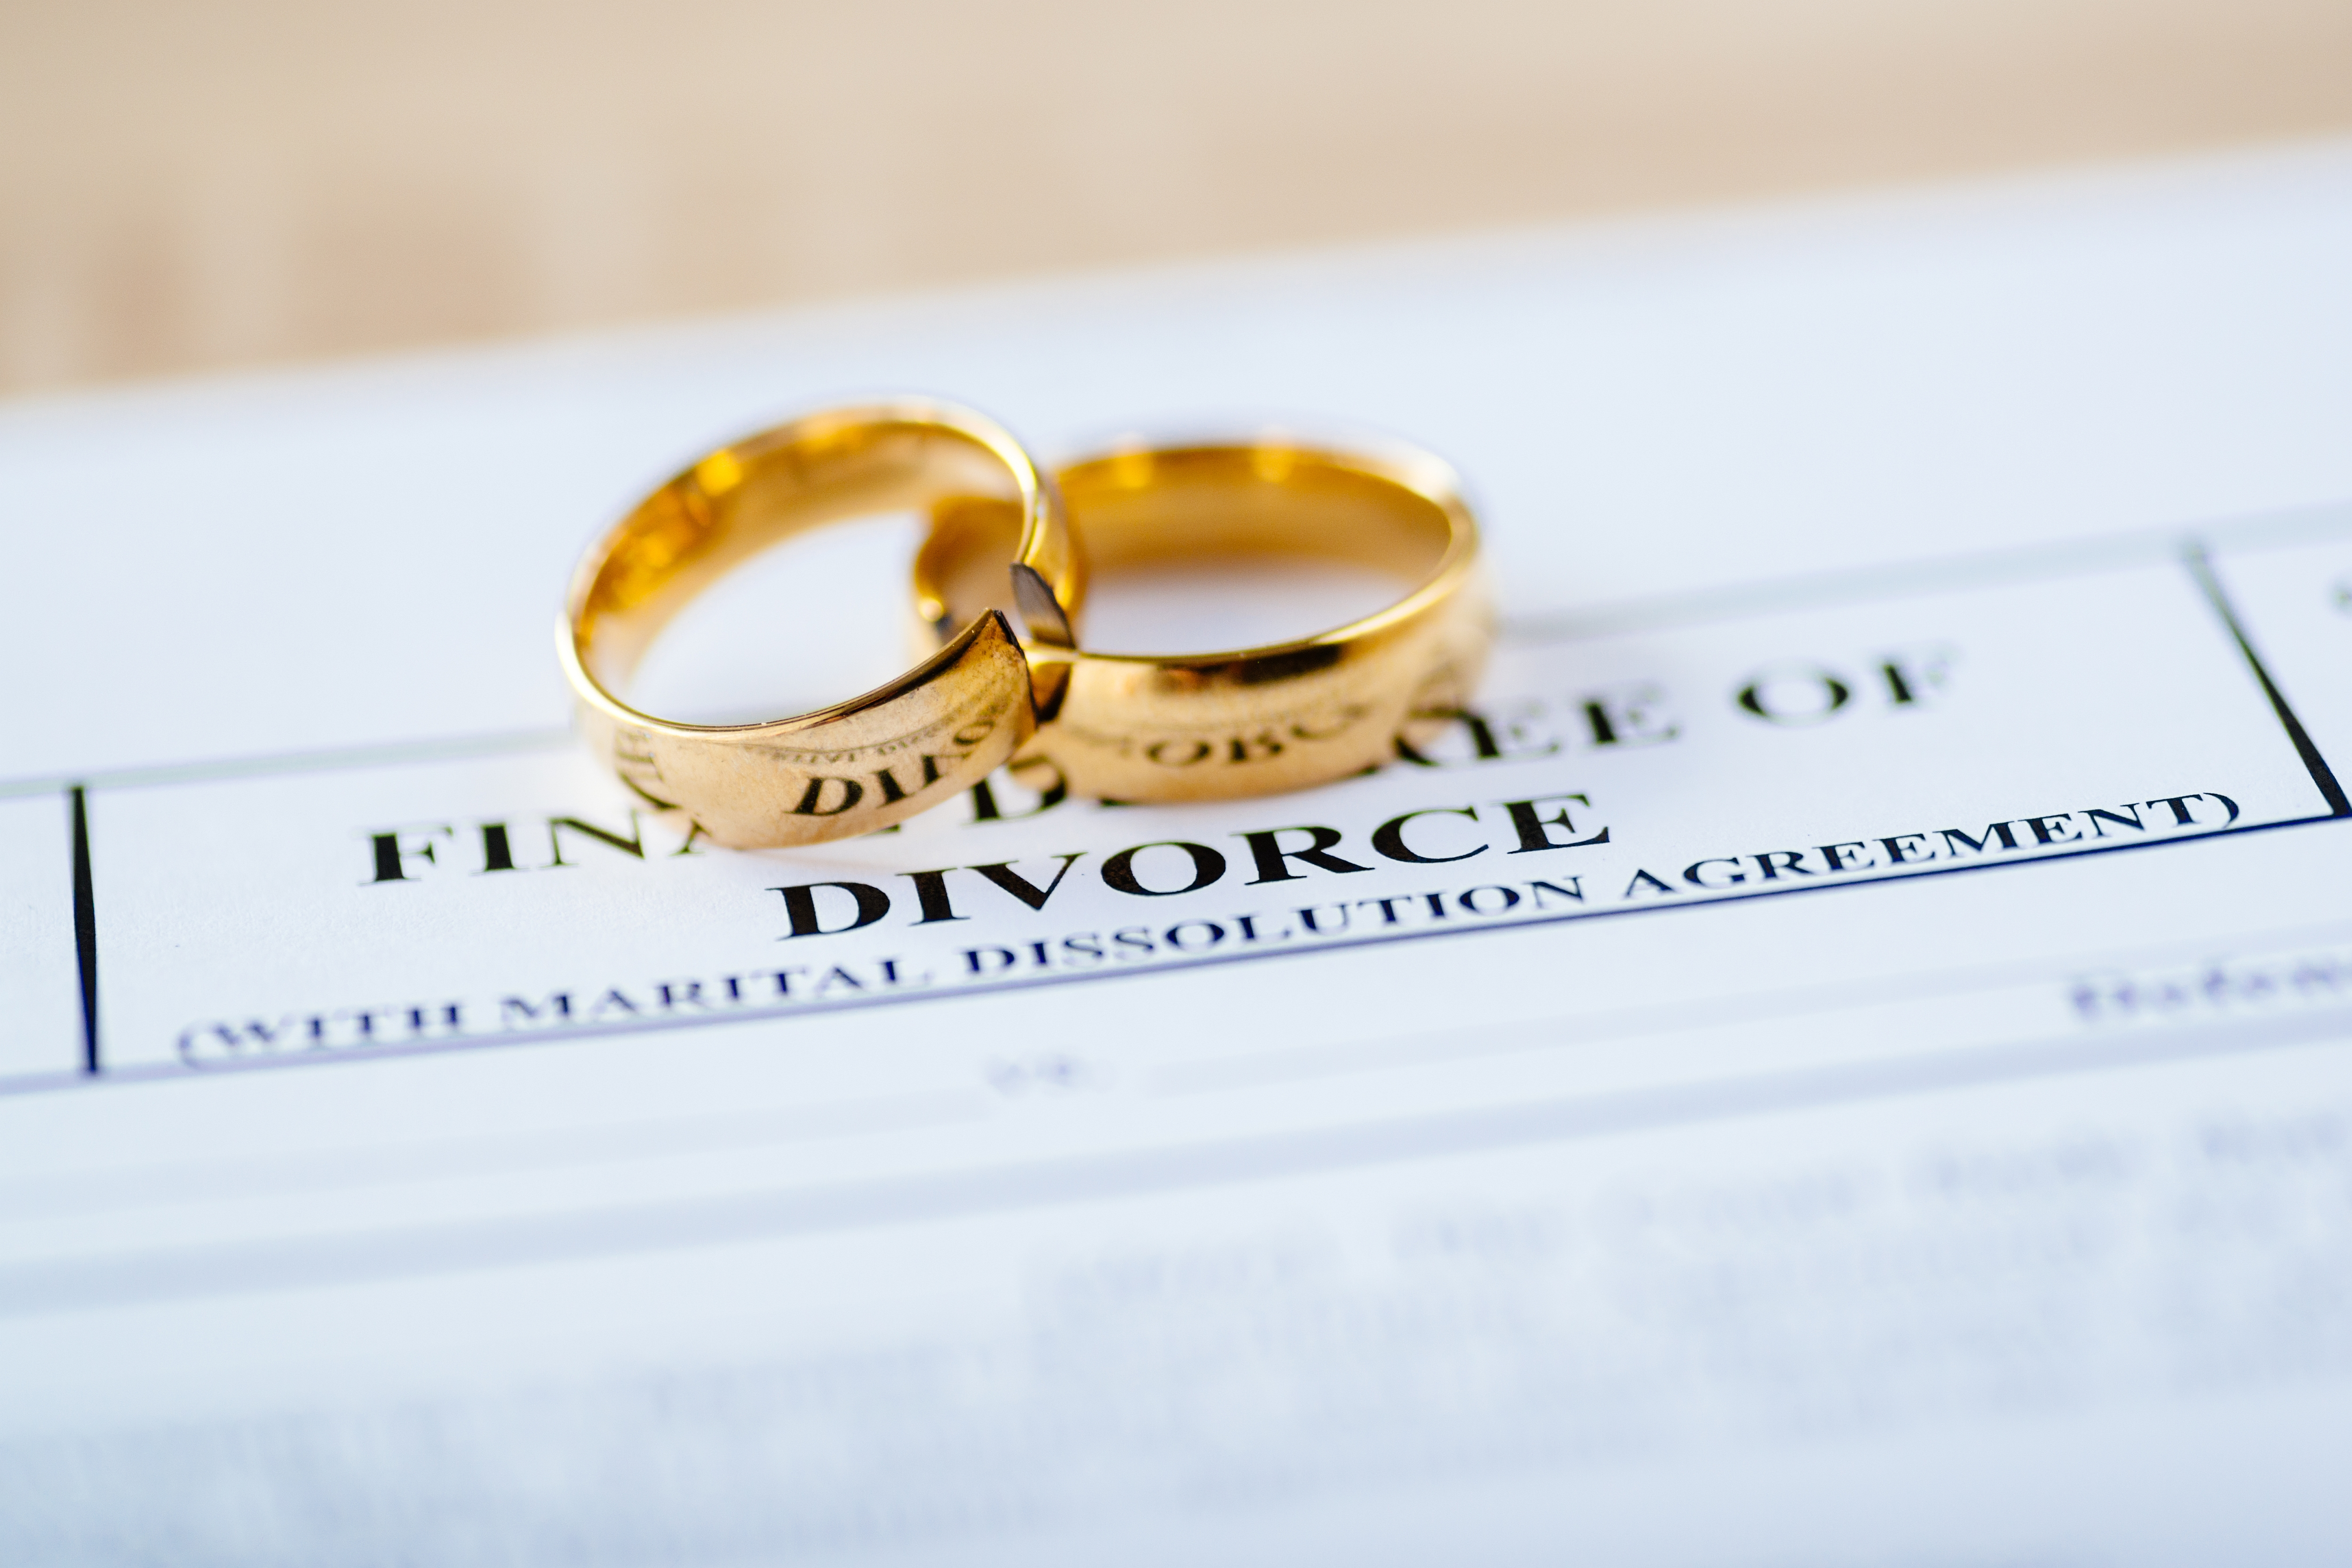 Two rings on a divorce agreement document | Source: Shutterstock